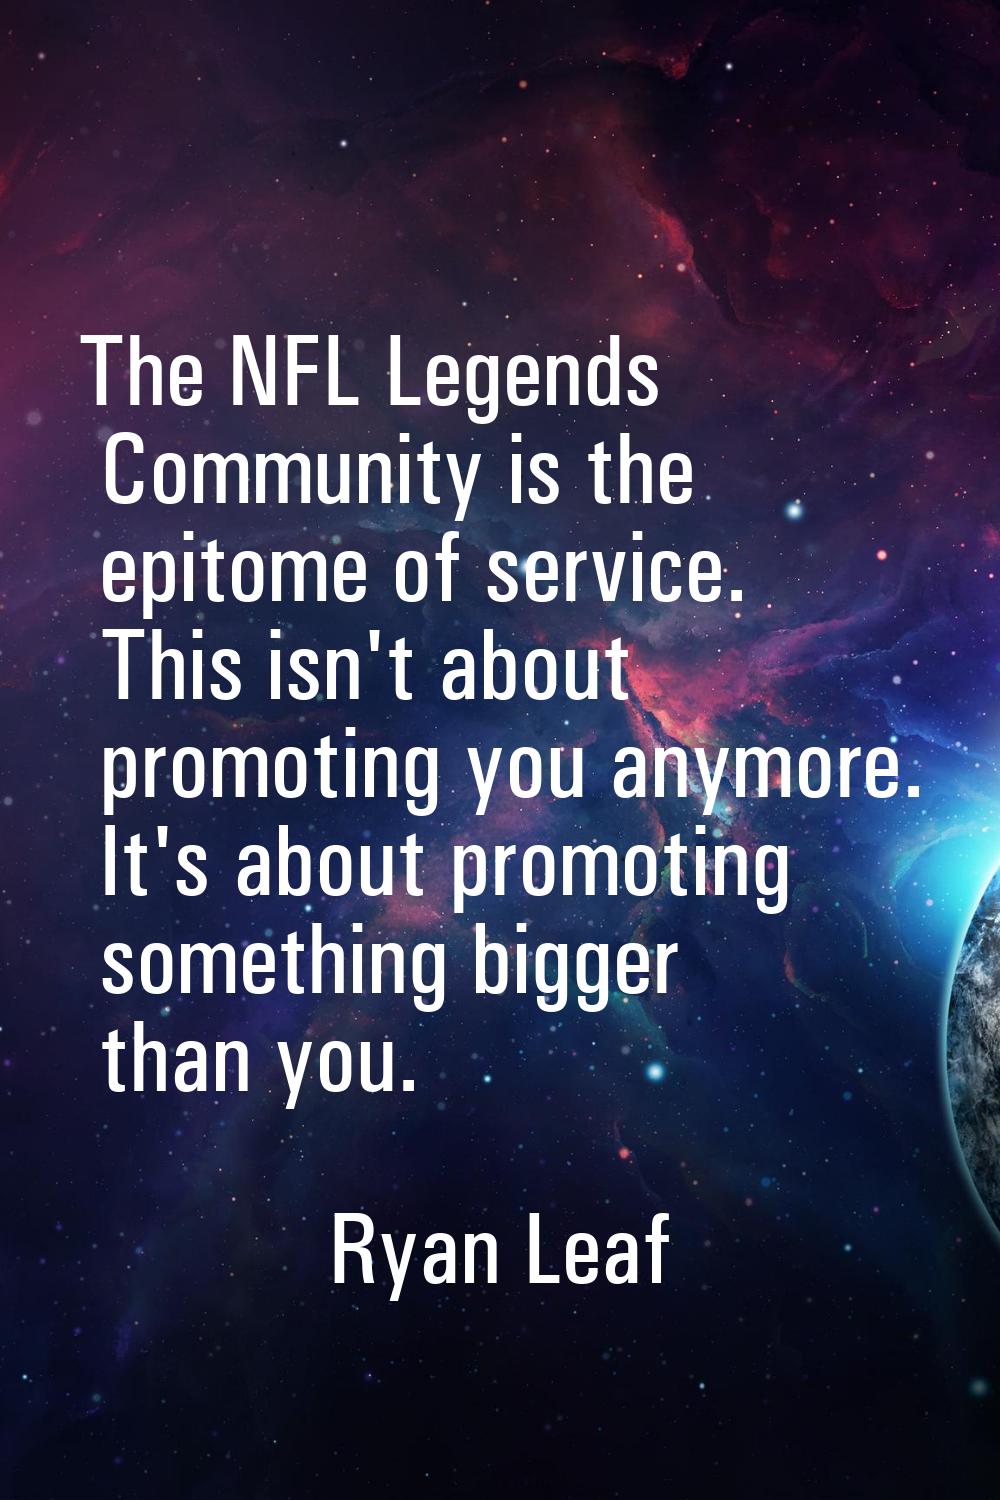 The NFL Legends Community is the epitome of service. This isn't about promoting you anymore. It's a